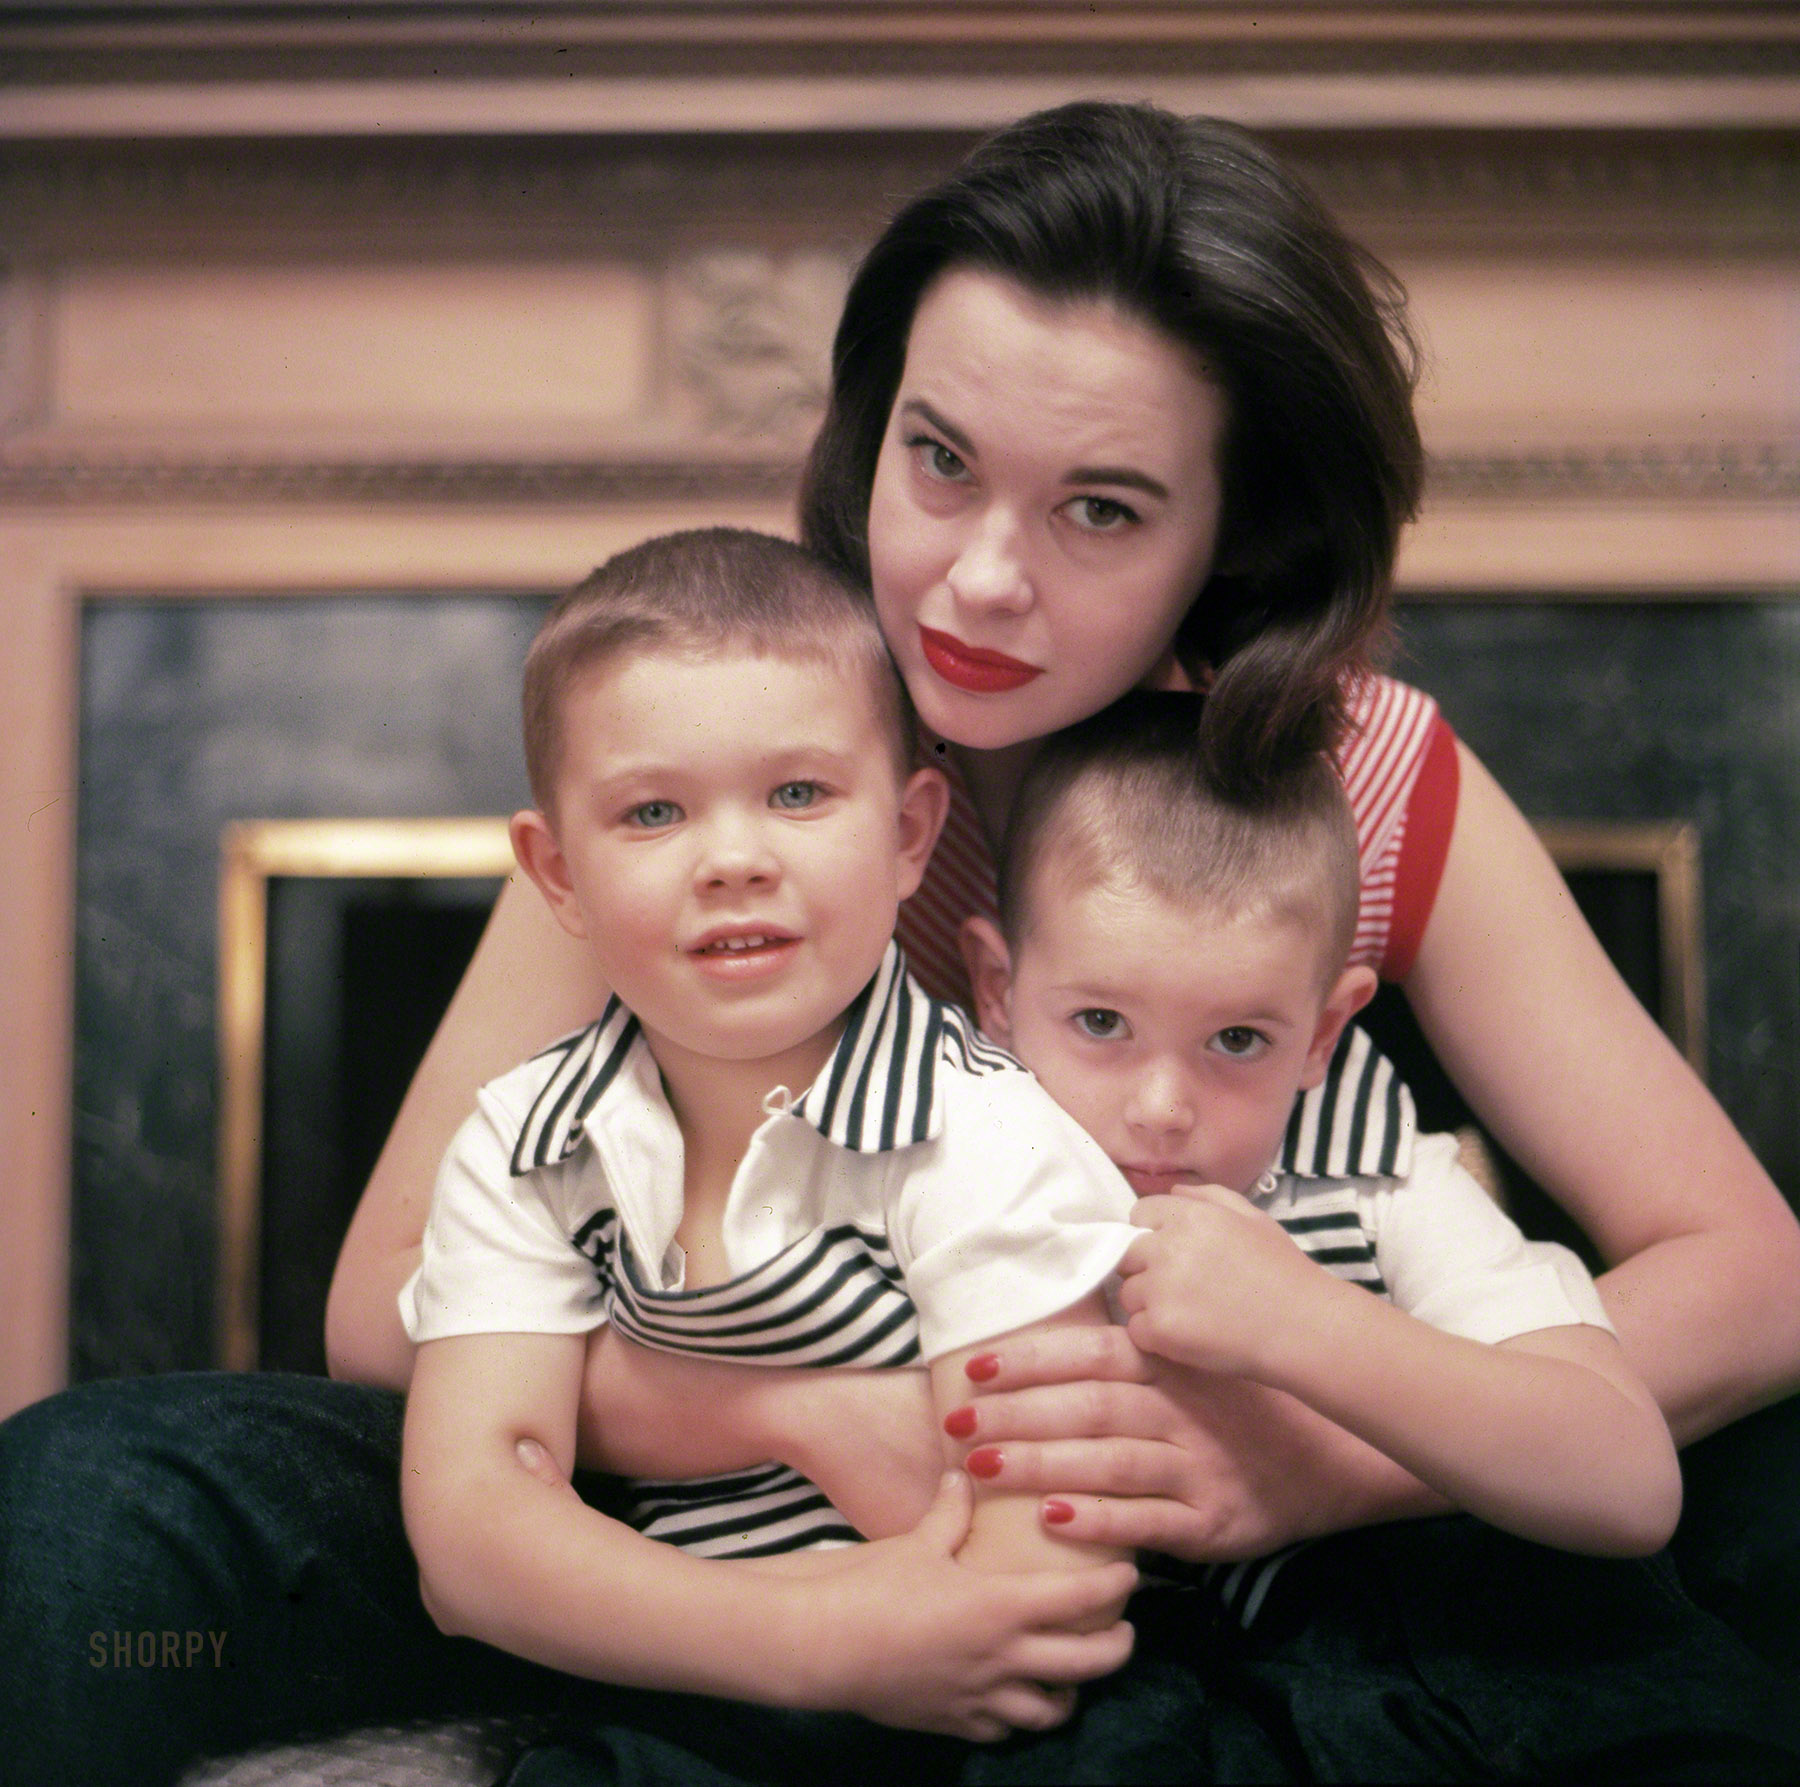 &nbsp; &nbsp; &nbsp; &nbsp; Gloria Vanderbilt, the society heiress who stitched her illustrious family name into designer jeans and built a $100 million fashion empire, crowning her tabloid story of a child-custody fight, of broken marriages and of jet-set romances, died on Monday at her home in Manhattan. She was 95.
— New York Times
January 1955. "Socialite Gloria Vanderbilt in her New York City apartment with Stanislas and Christopher, her sons by conductor husband Leopold Stokowski." Color transparency from photos for the Look magazine assignment "Gloria Vanderbilt Builds a New Life." View full size.